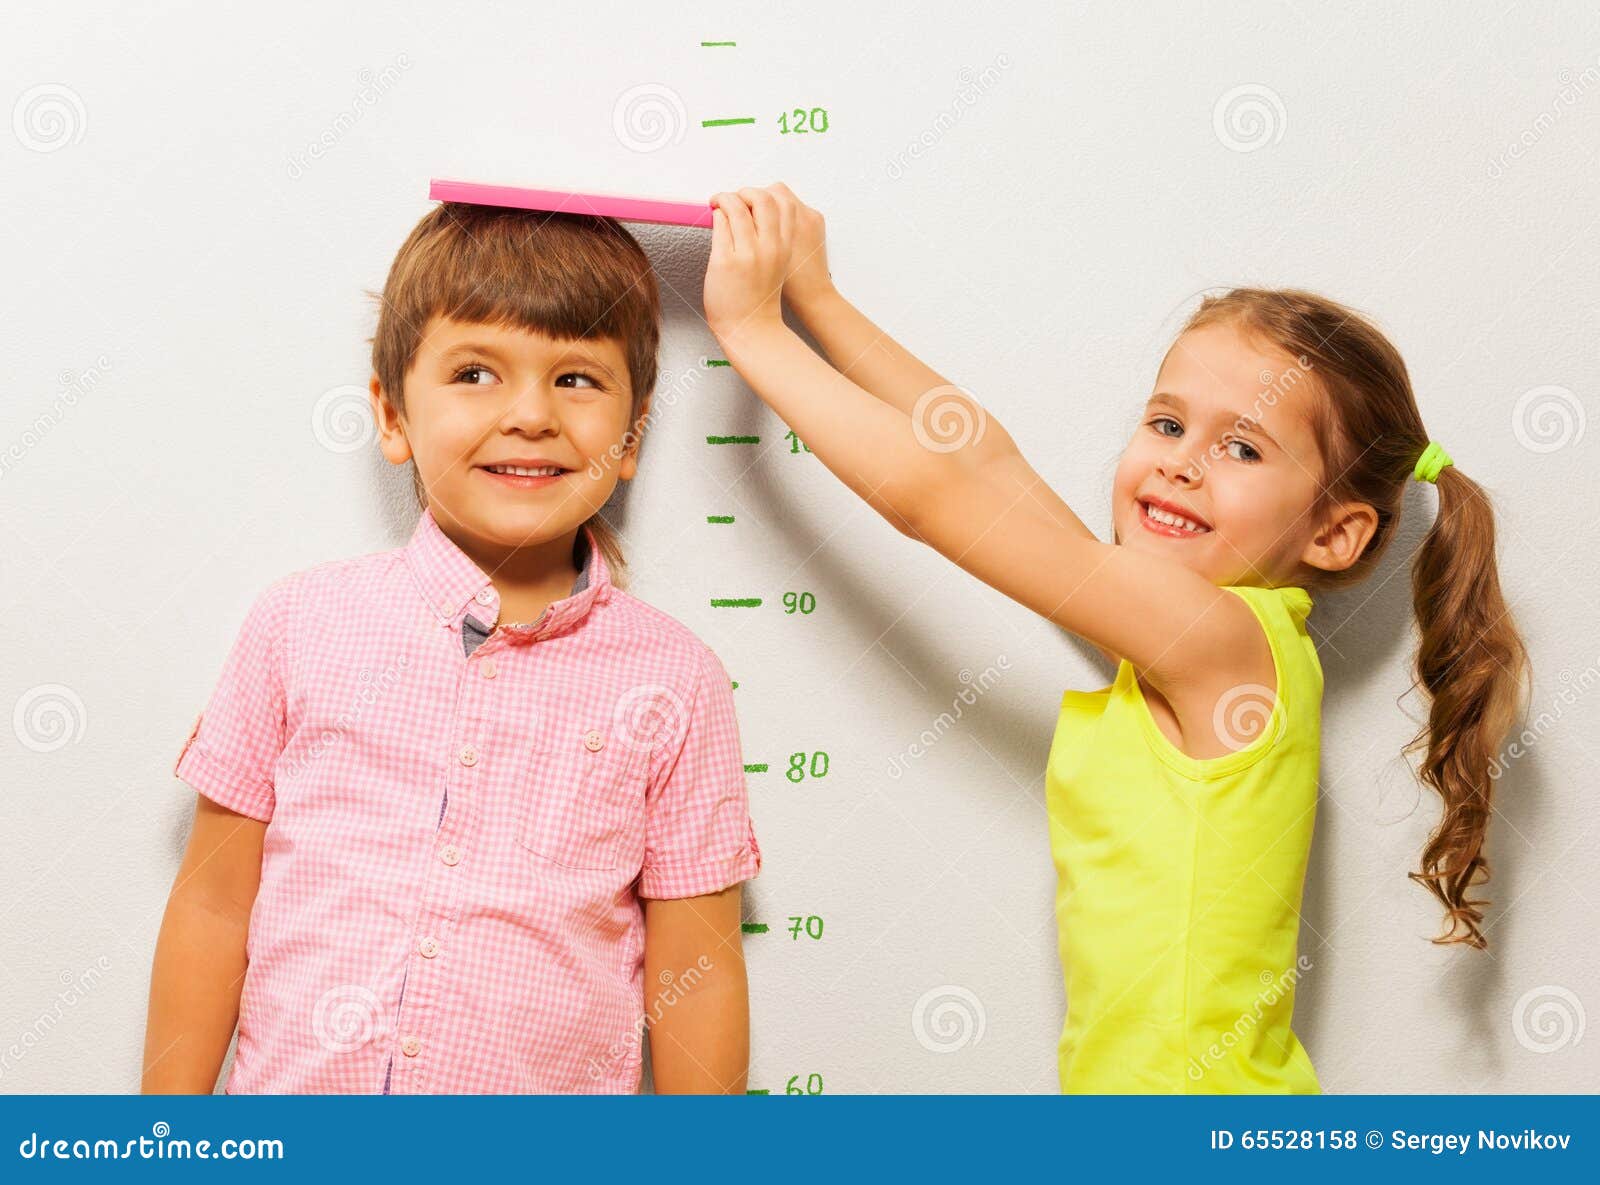 boy and girl measure height by wall scale at home